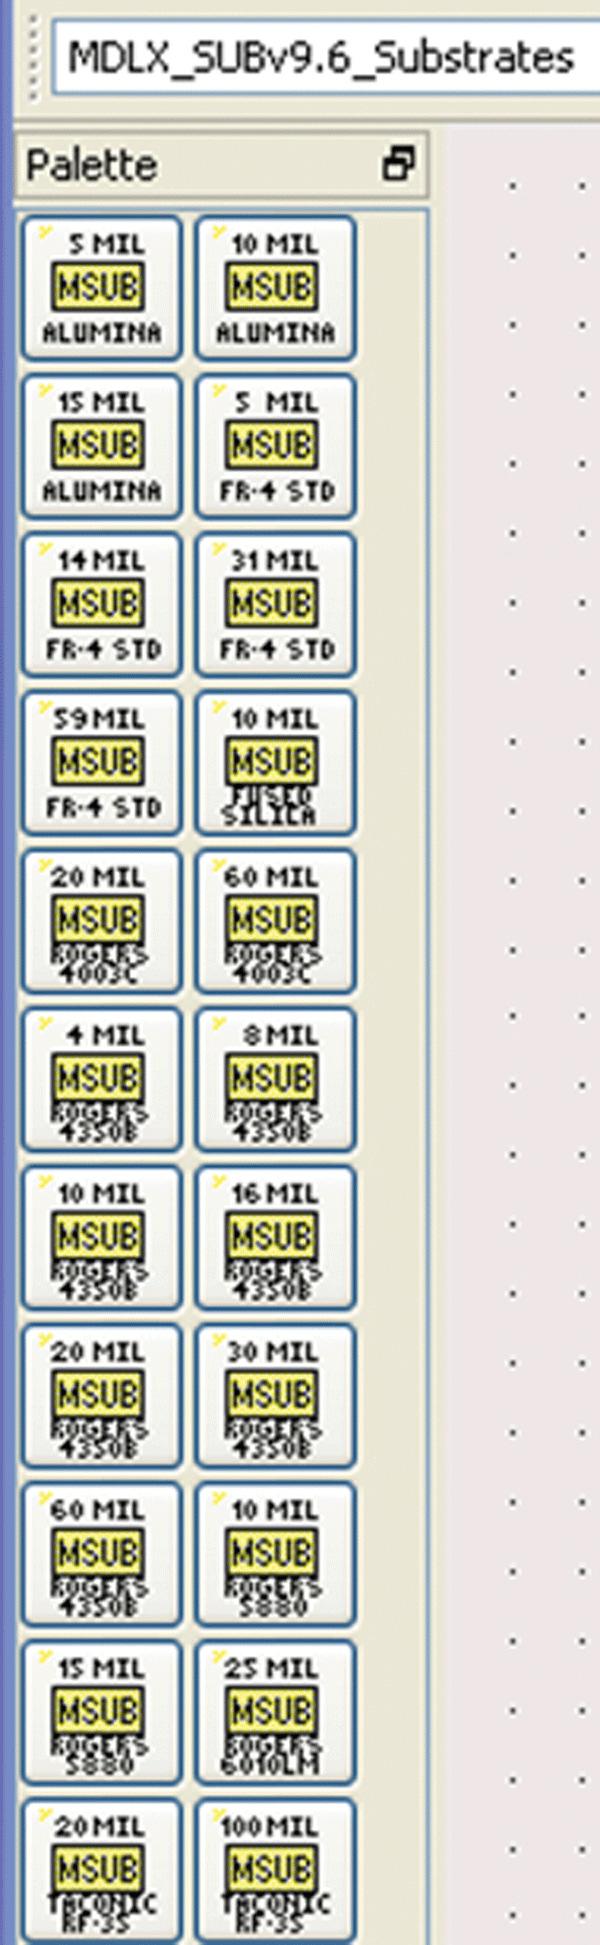 2 of 6 3/25/2013 10:38 PM 1. This substrate library is located in the palette s tab of an ADS schematic.